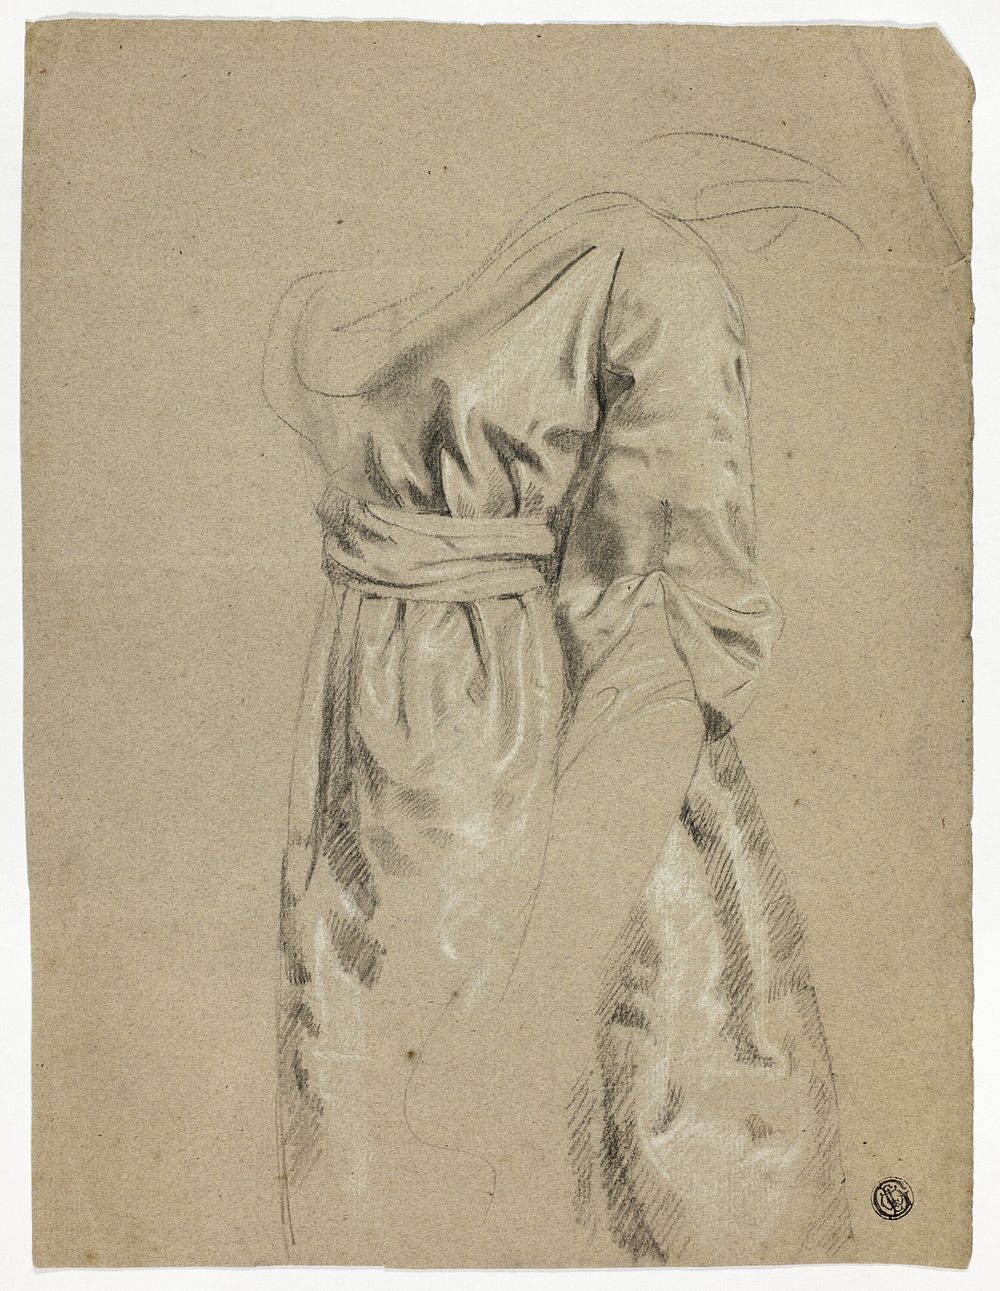 High-Waisted Gown by John Downman